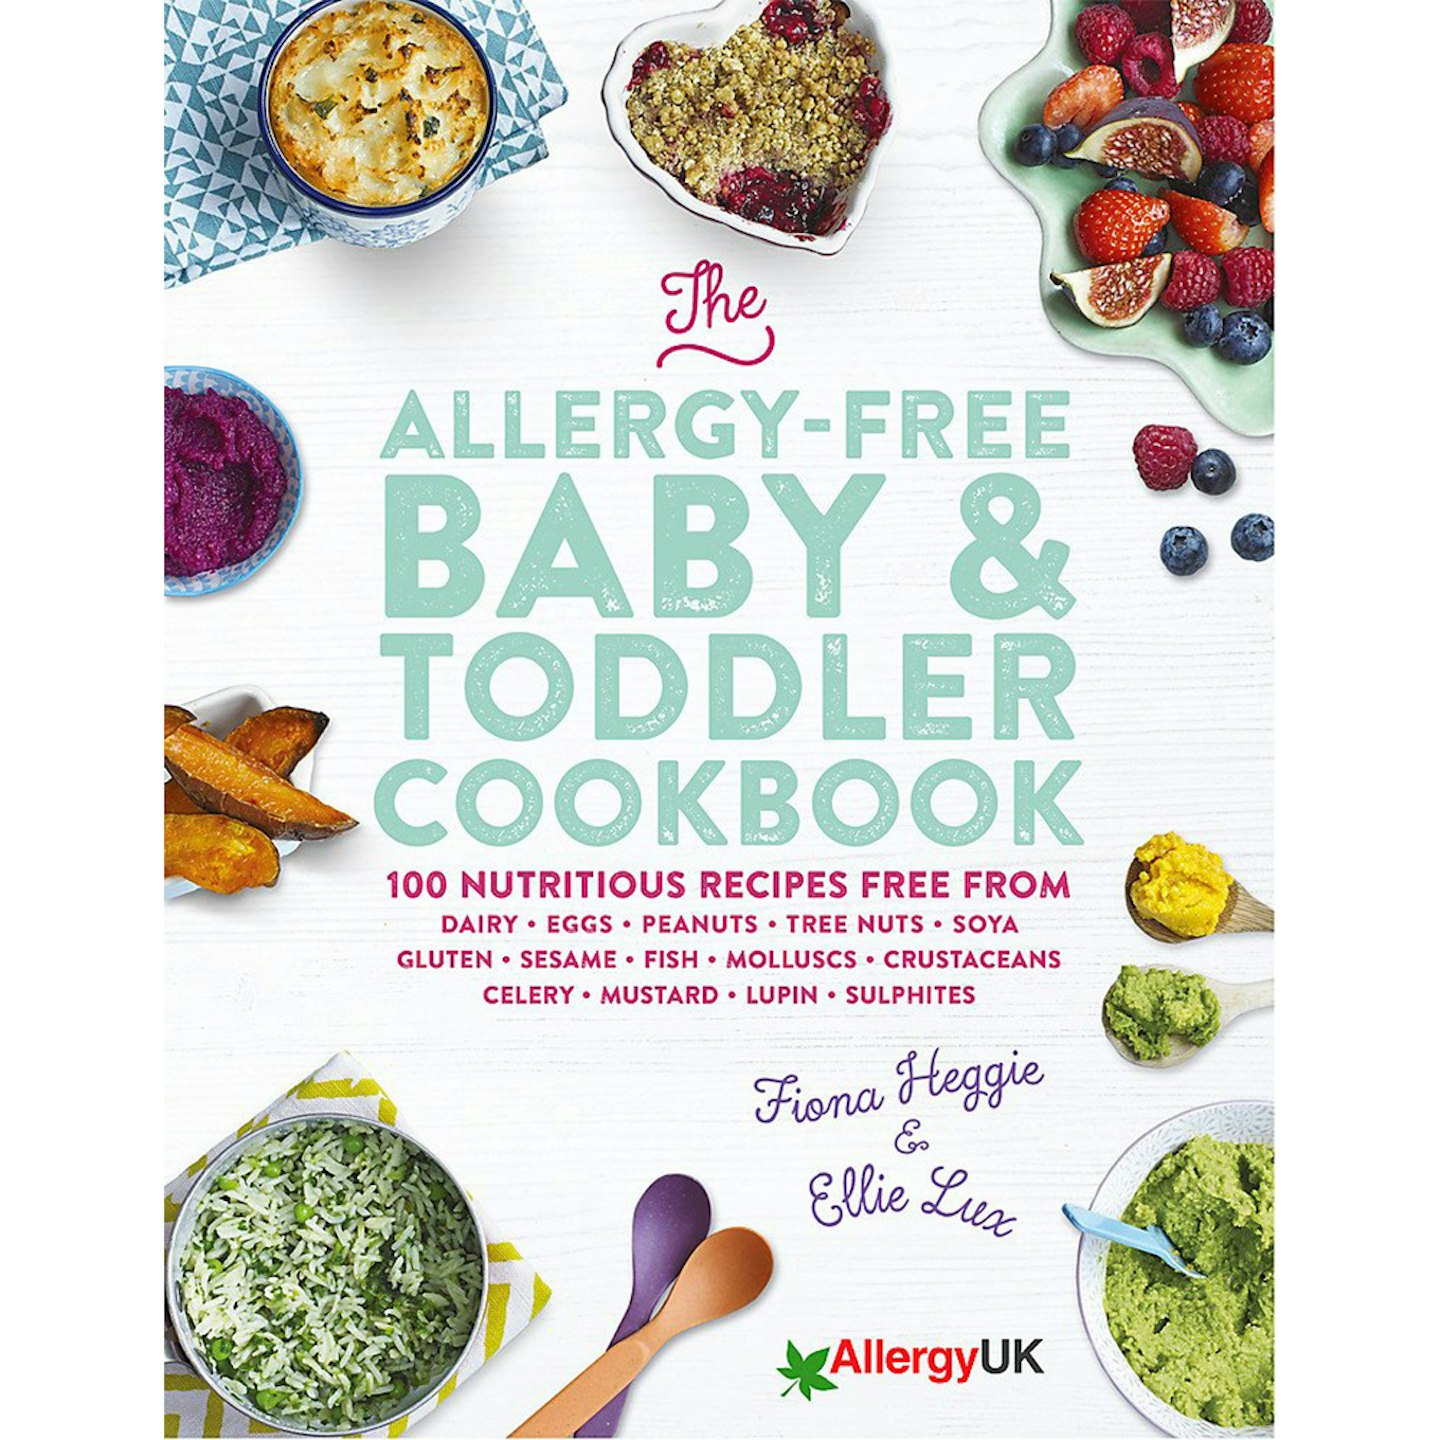 The Allergy-Free Baby & Toddler Cookbook